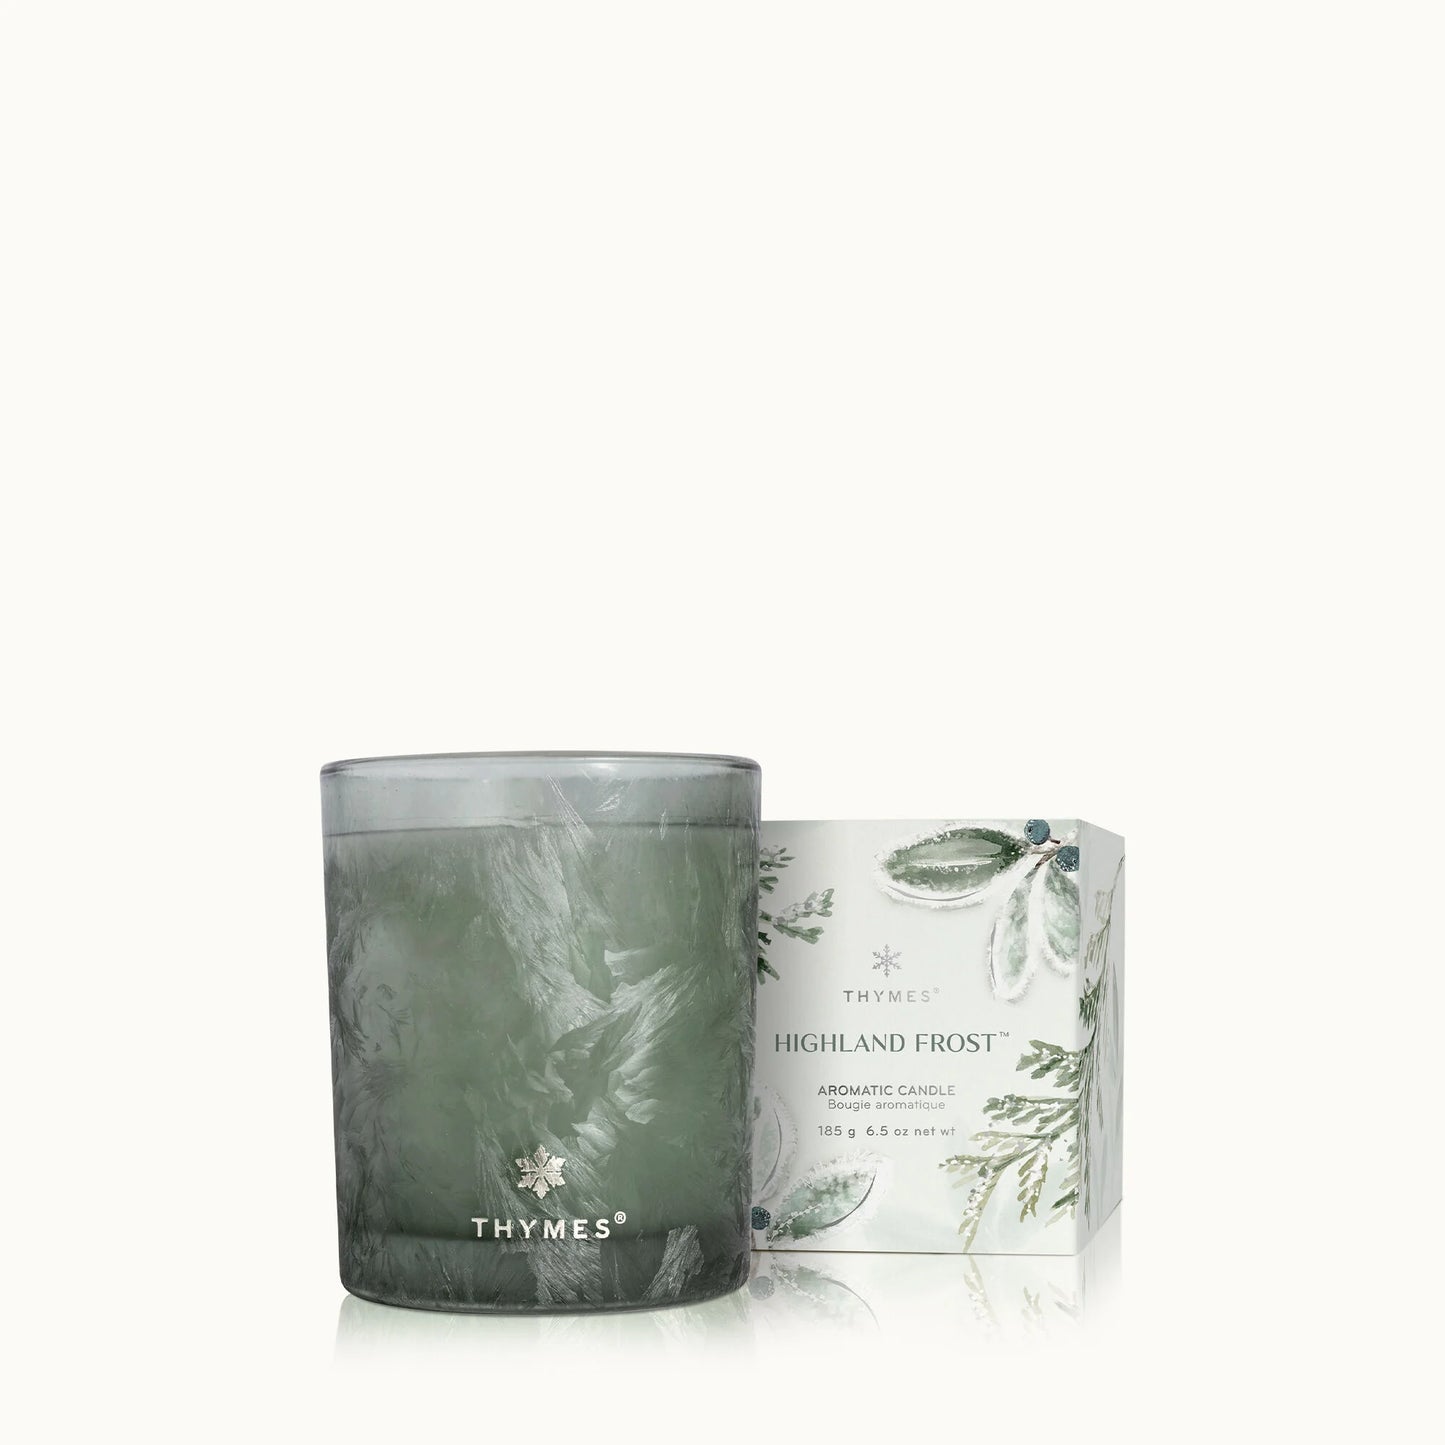 THYMES Highland Frost Candle - 6.5 oz